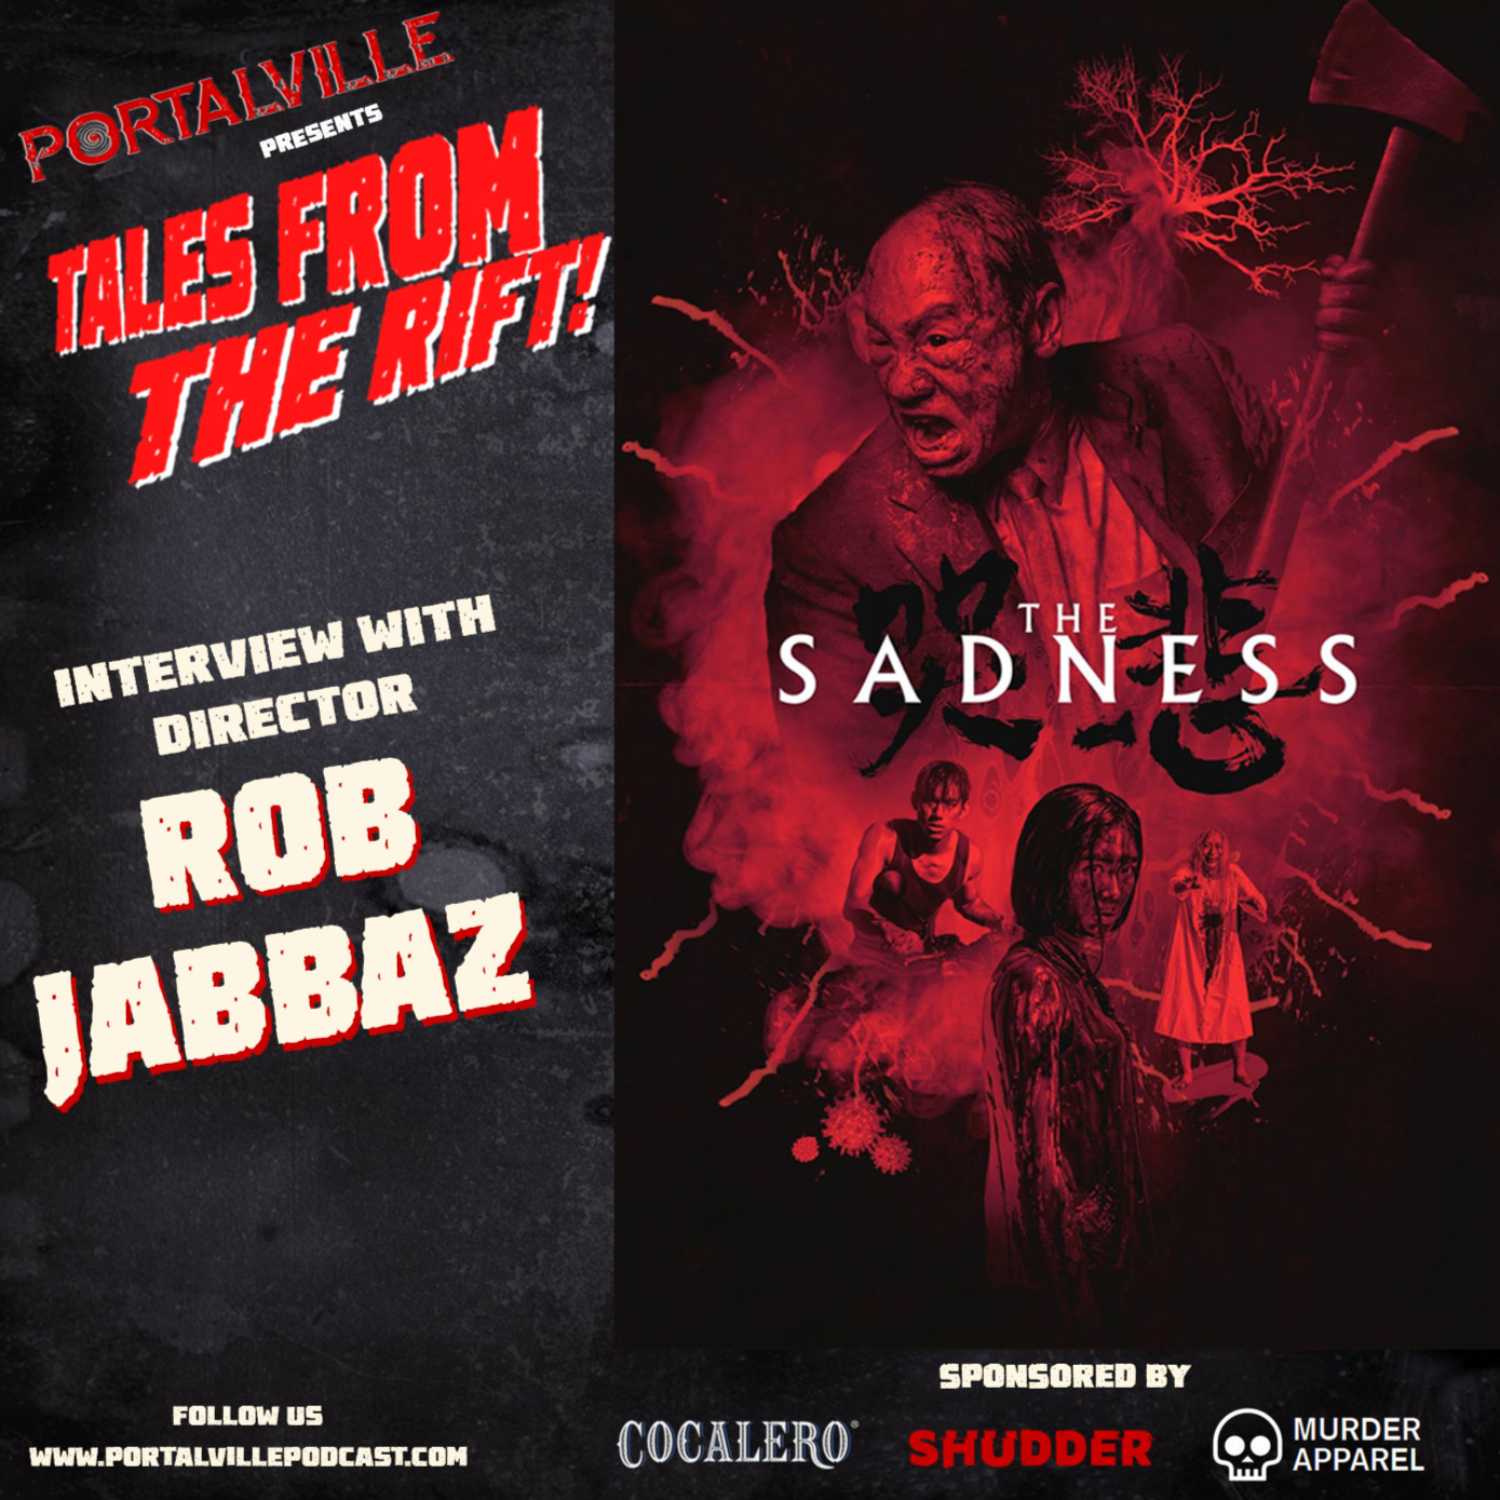 The Sadness! Interview with Director Rob Jabbaz